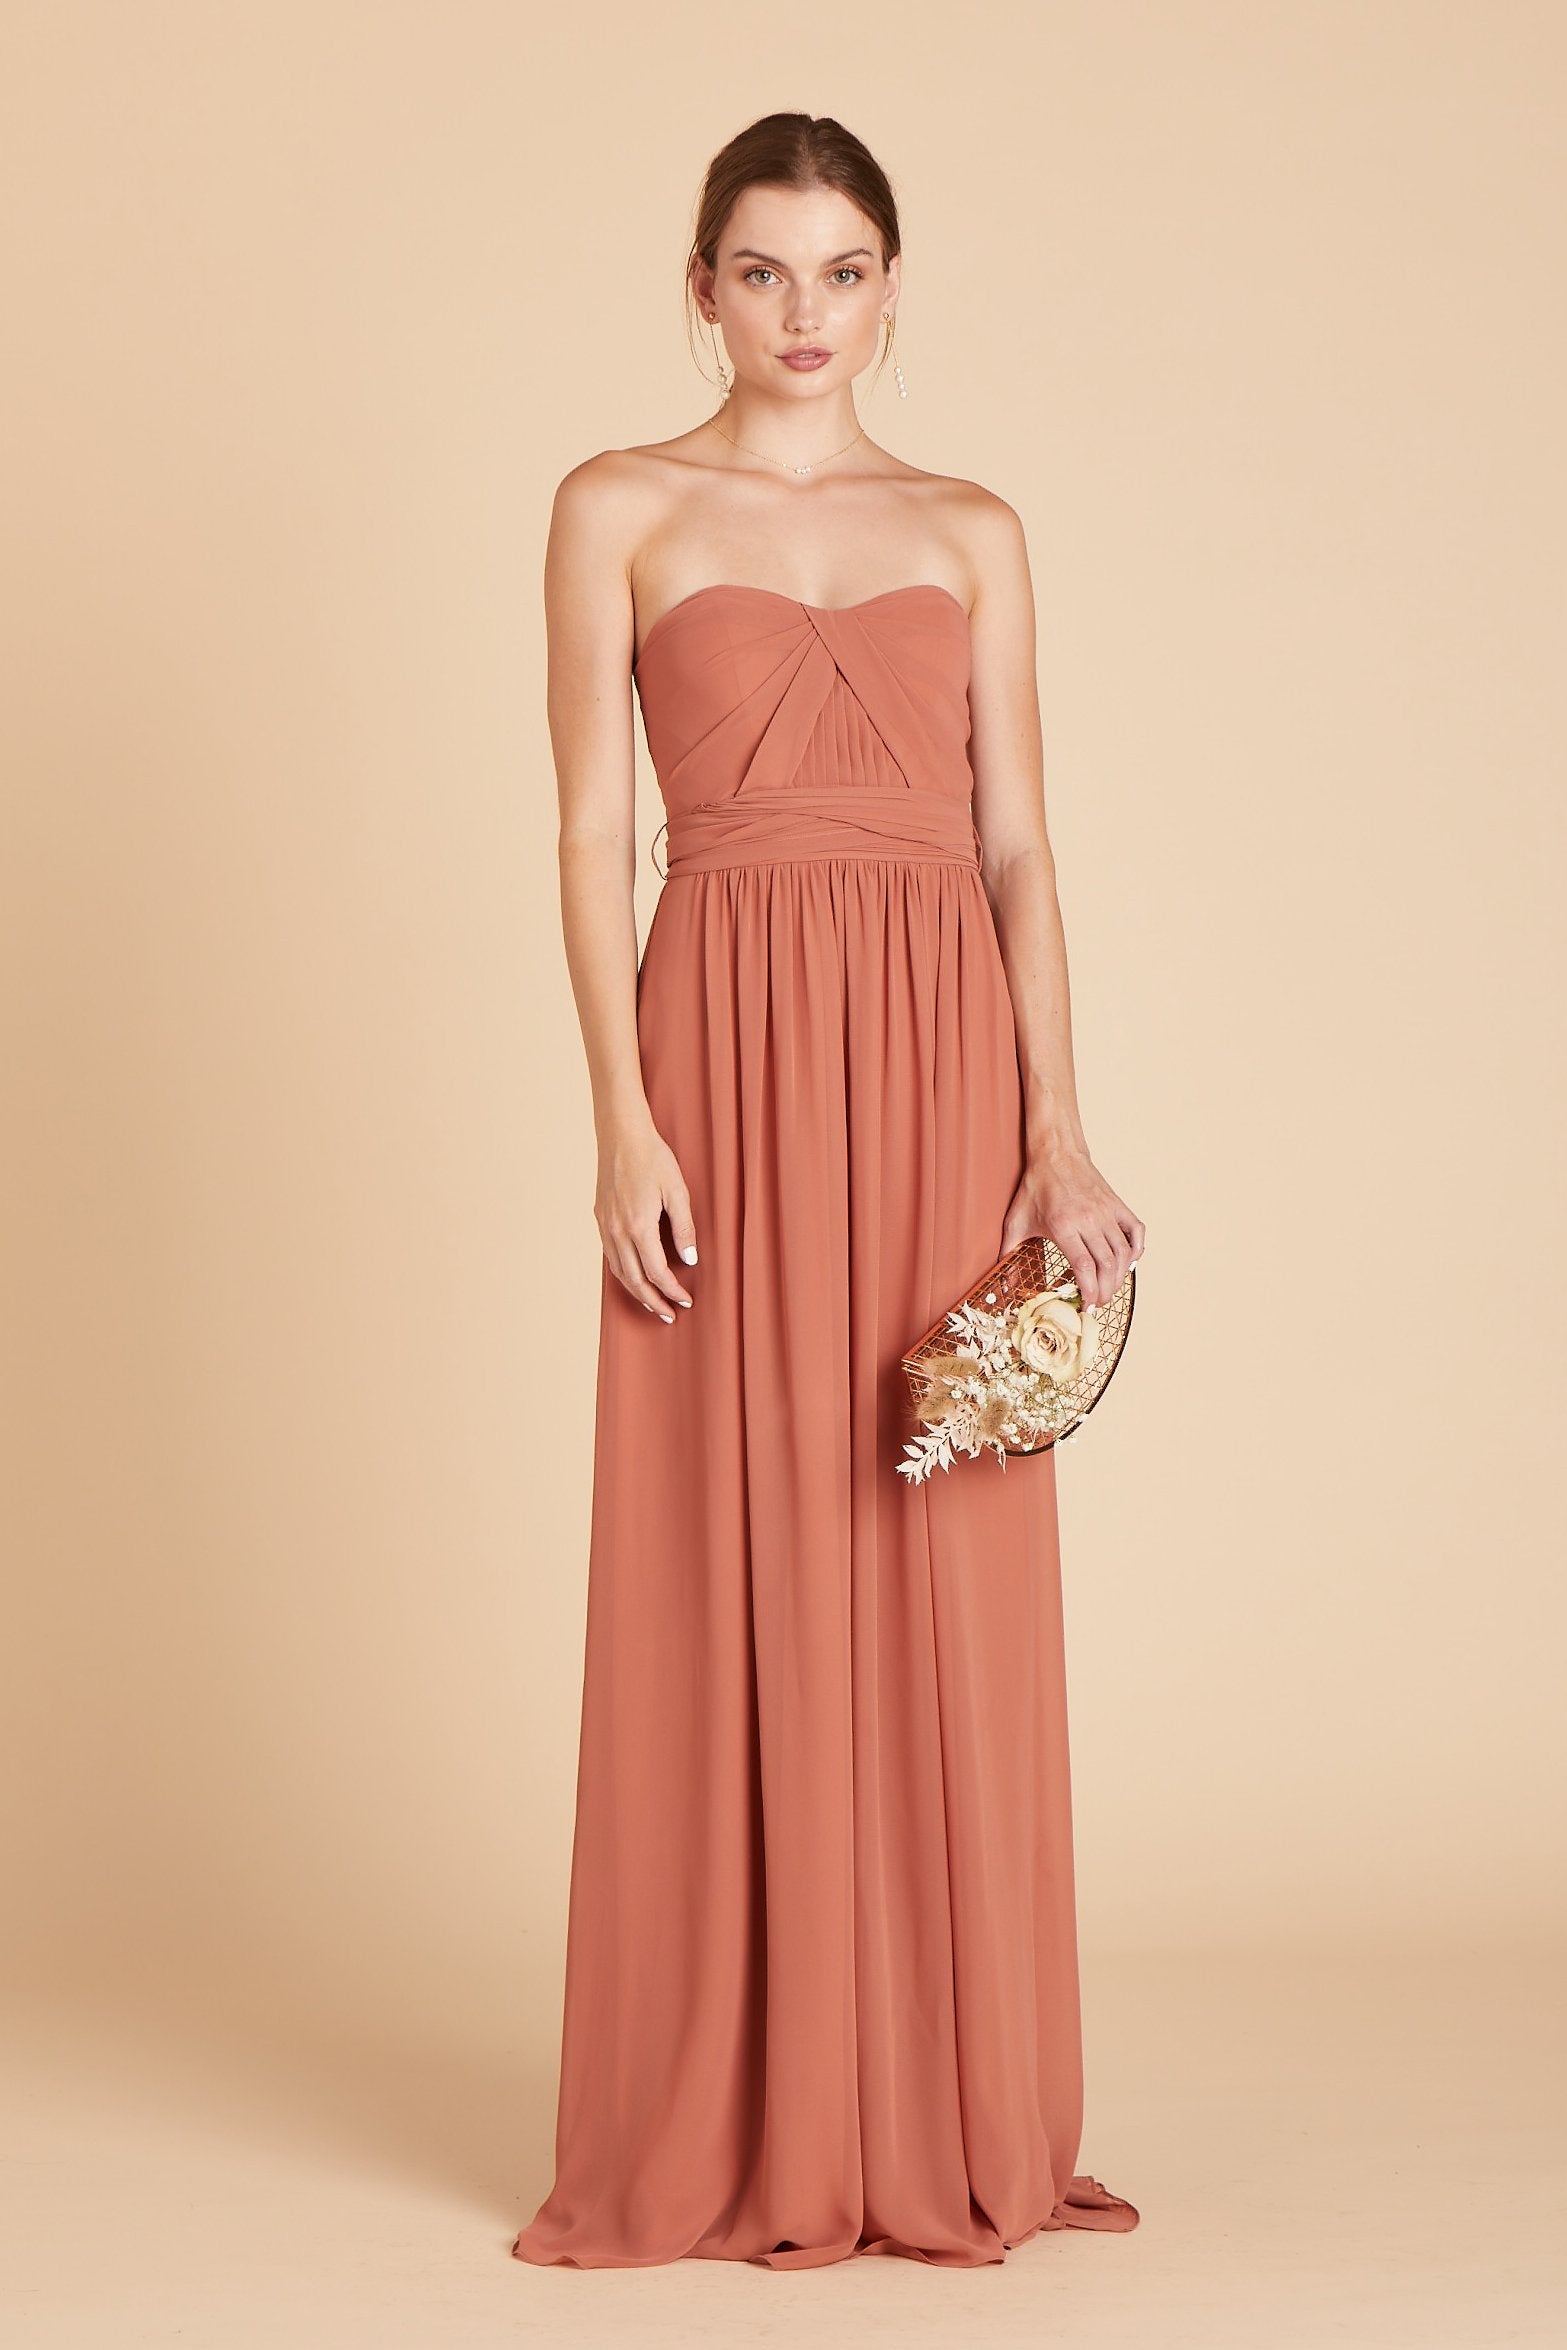 Front view of the Grace Convertible Dress in terracotta chiffon worn by a slender model with a light skin tone. 